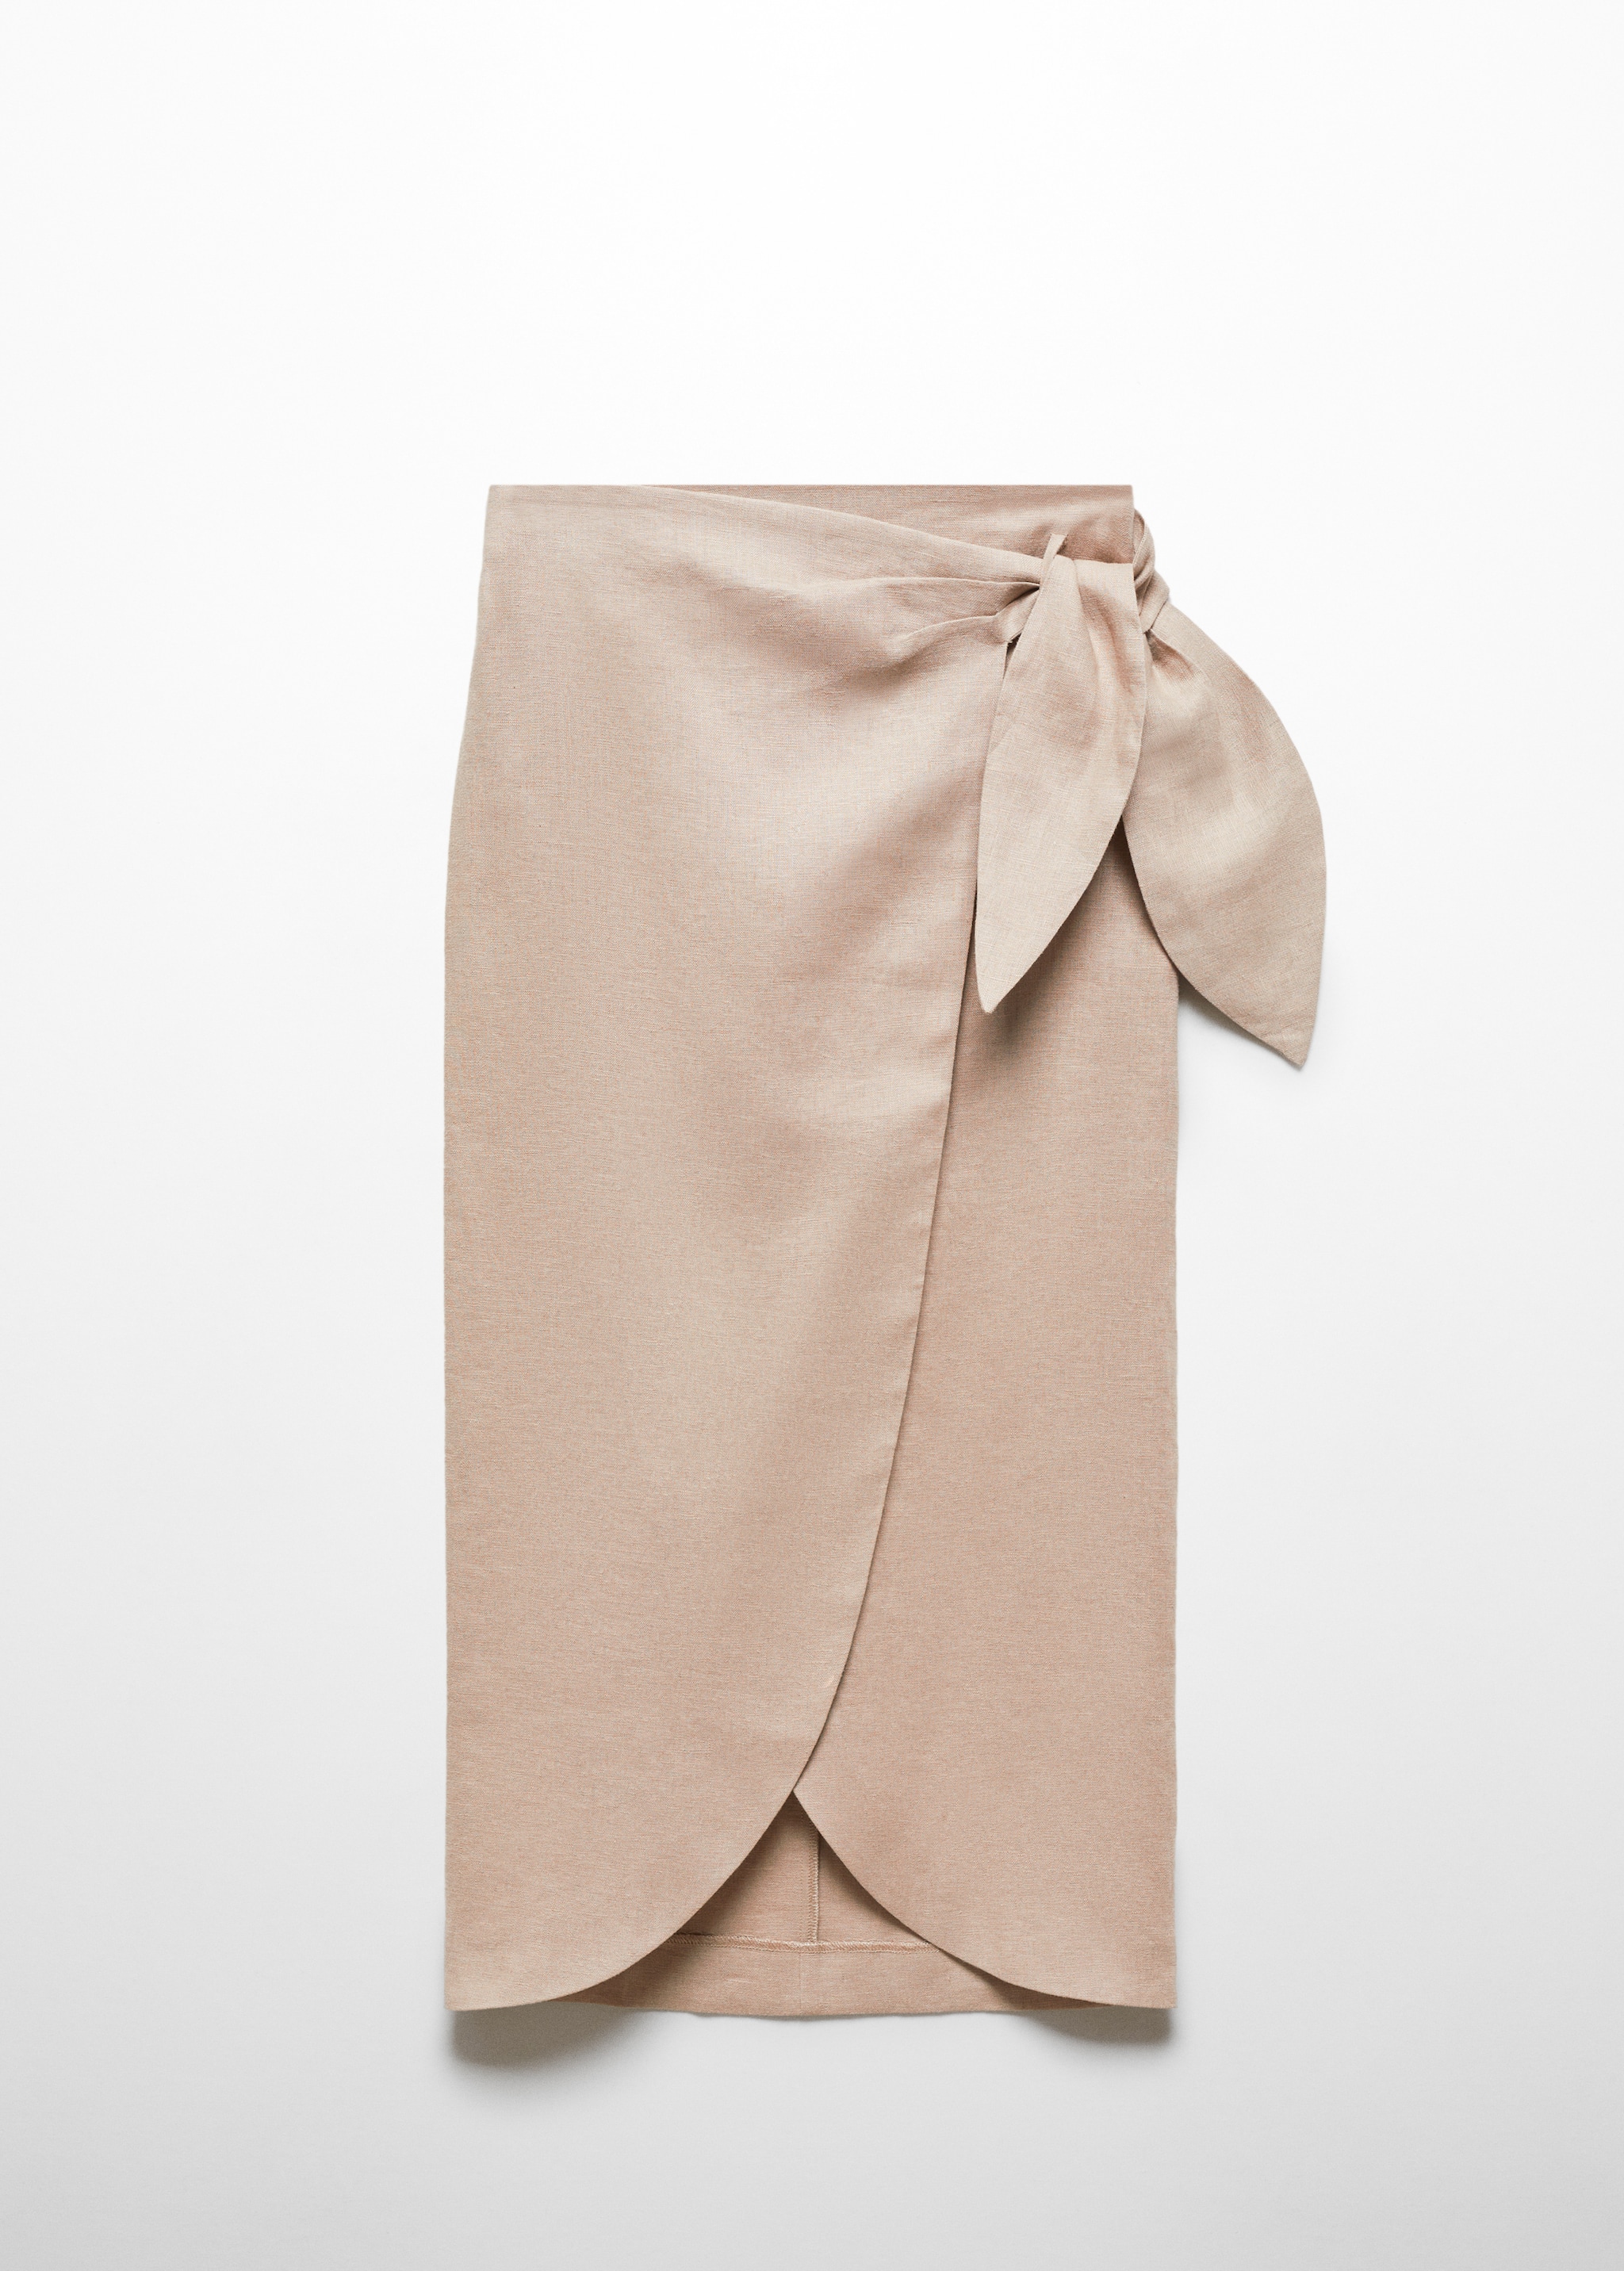 Bow linen skirt - Article without model